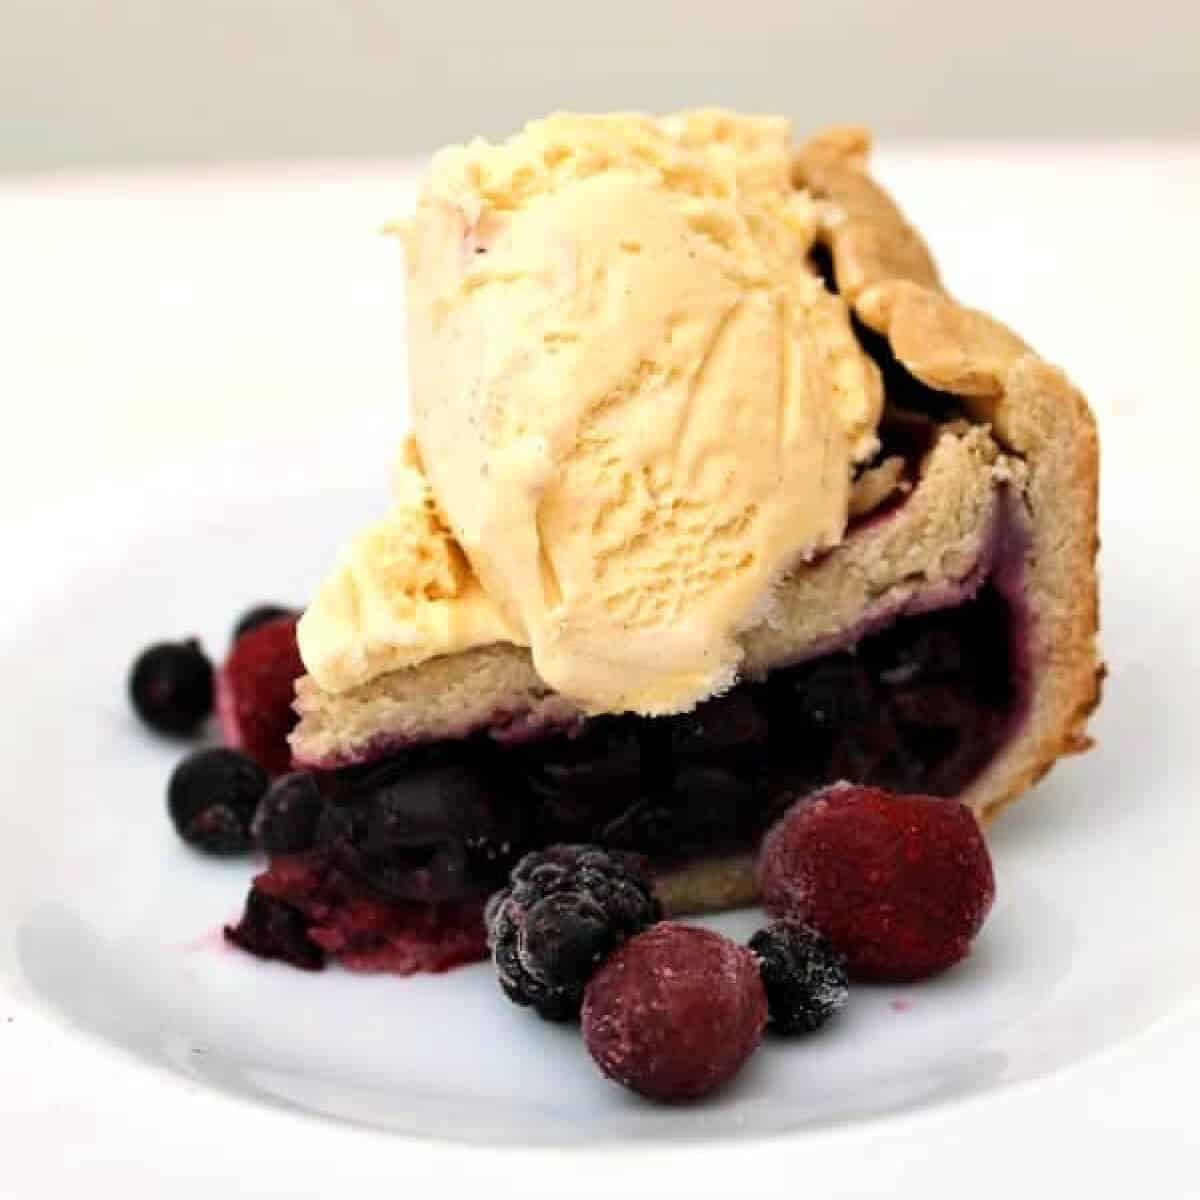 Slice of berry pie topped with ice cream on white plate.